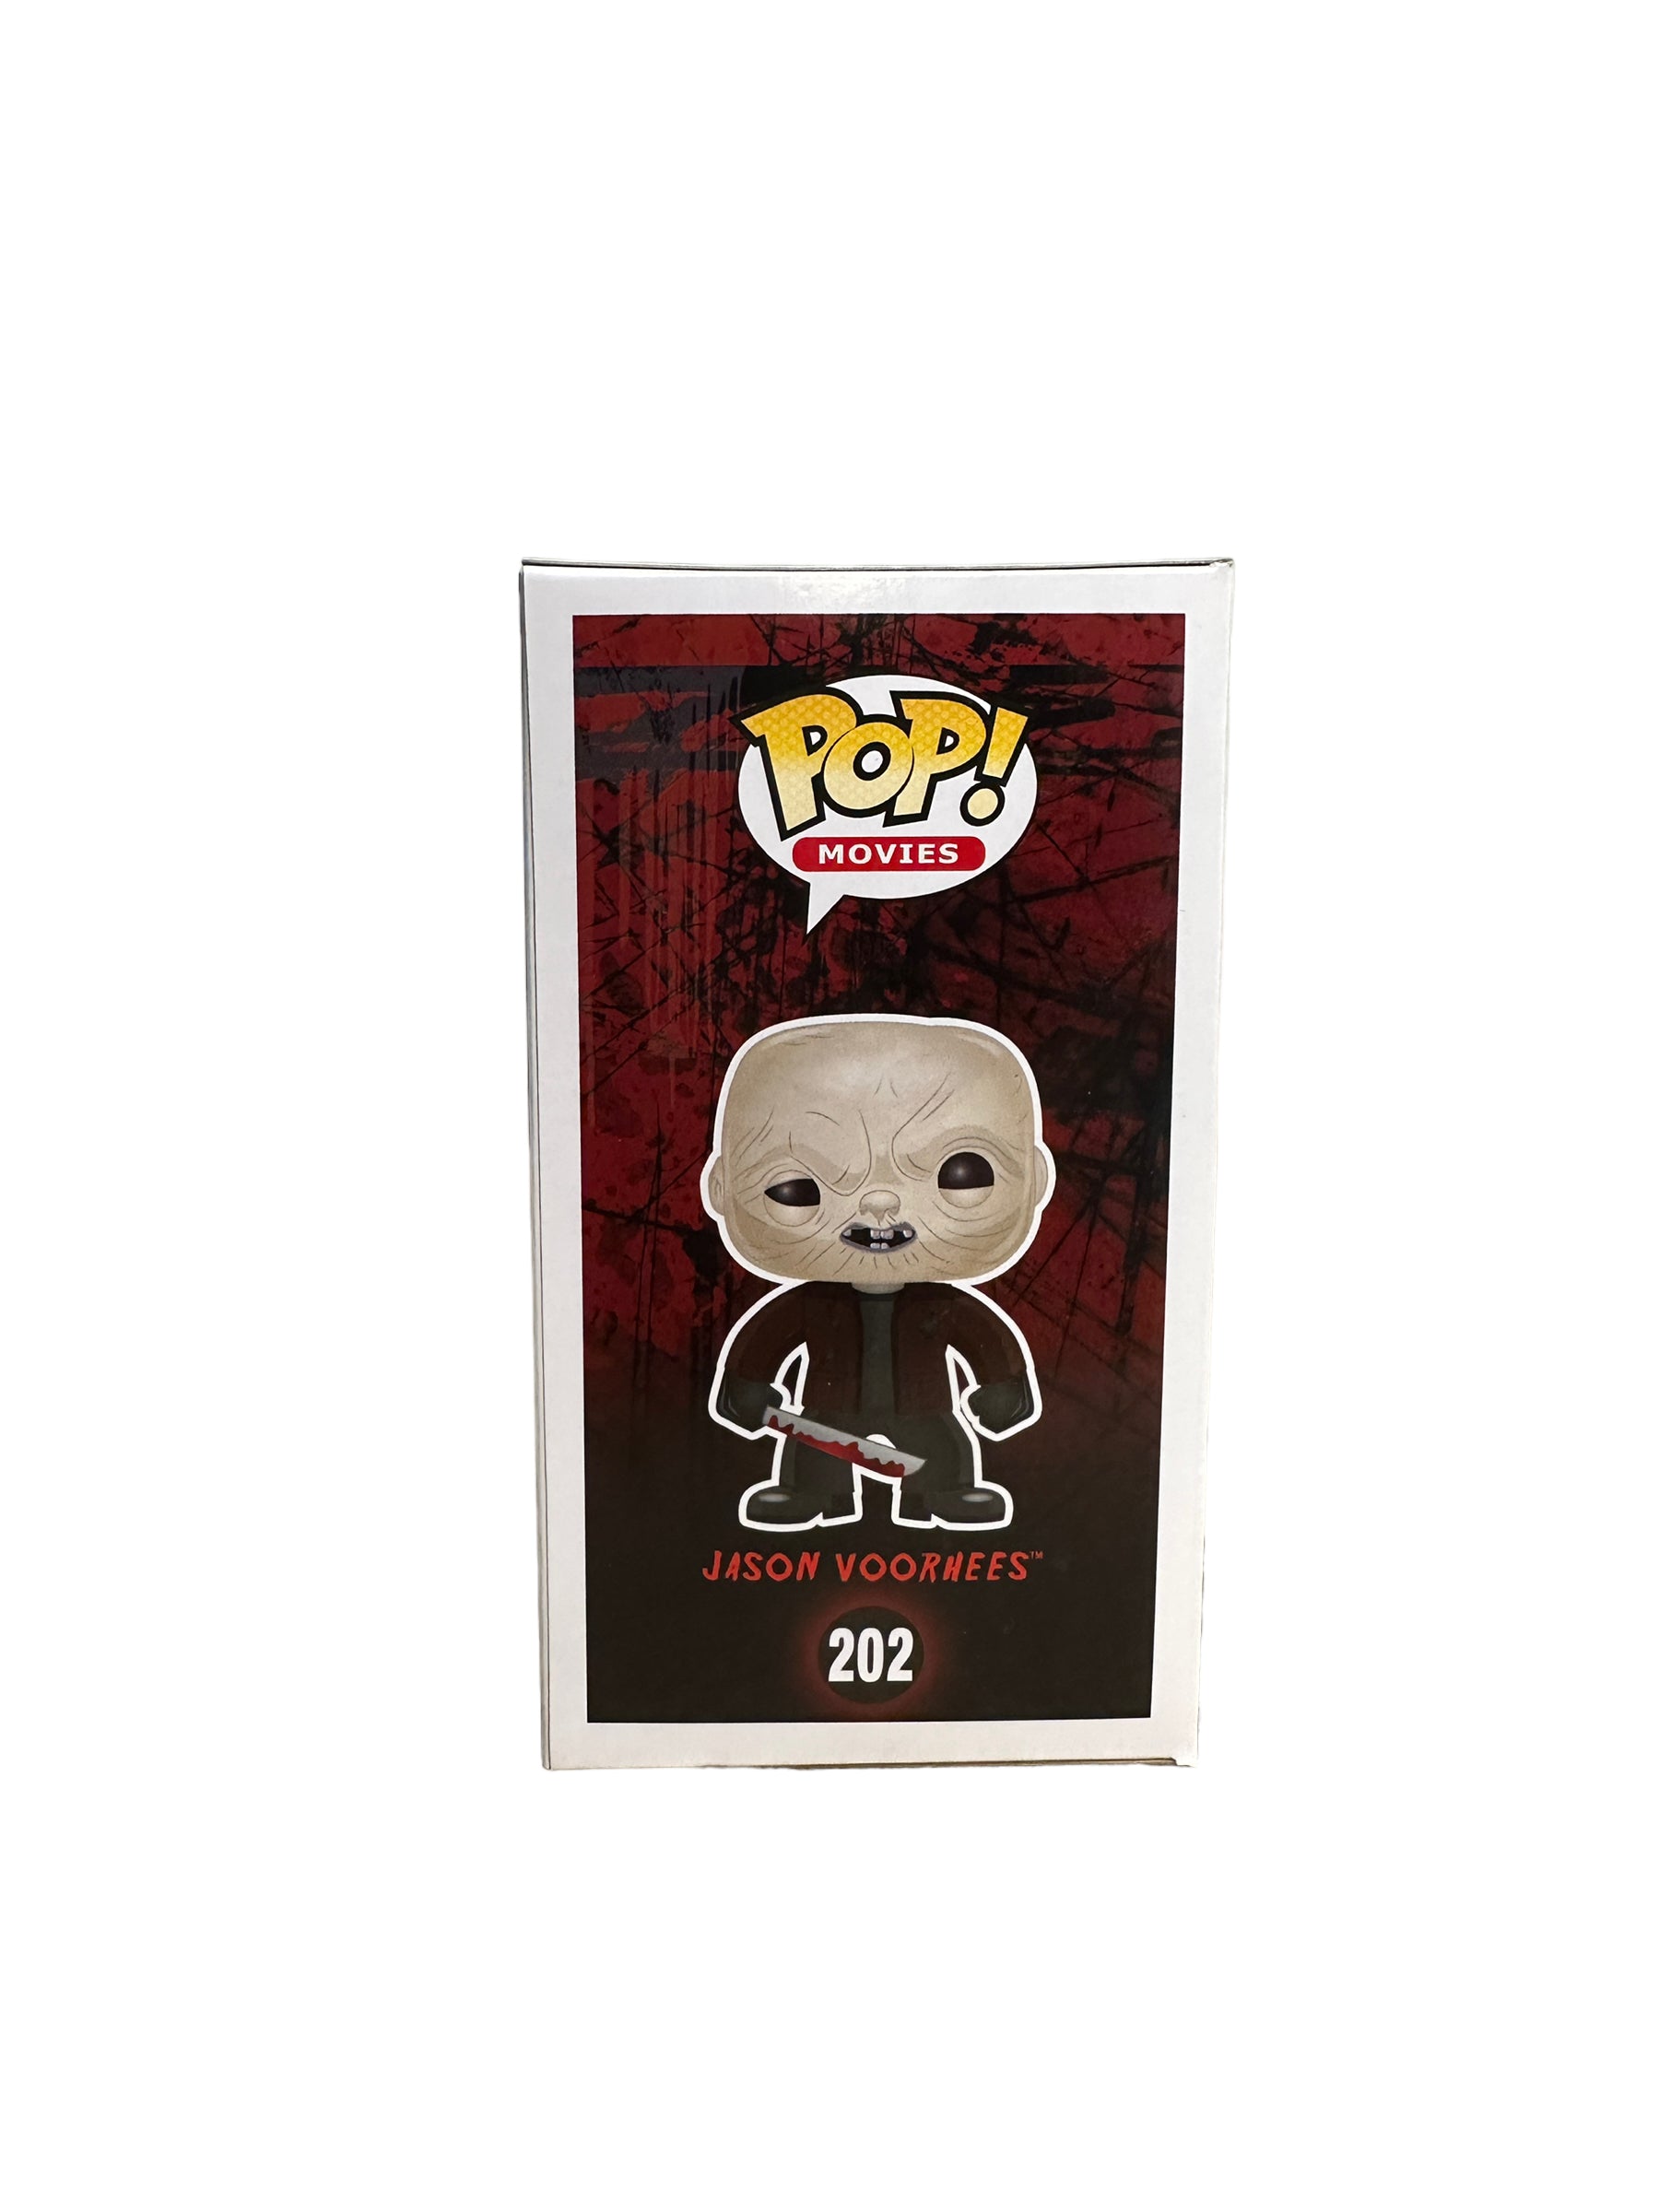 Jason Voorhees #202 (Unmasked) Funko Pop! - Friday the 13th - SDCC 2015 Shared Exclusive - Condition 9/10